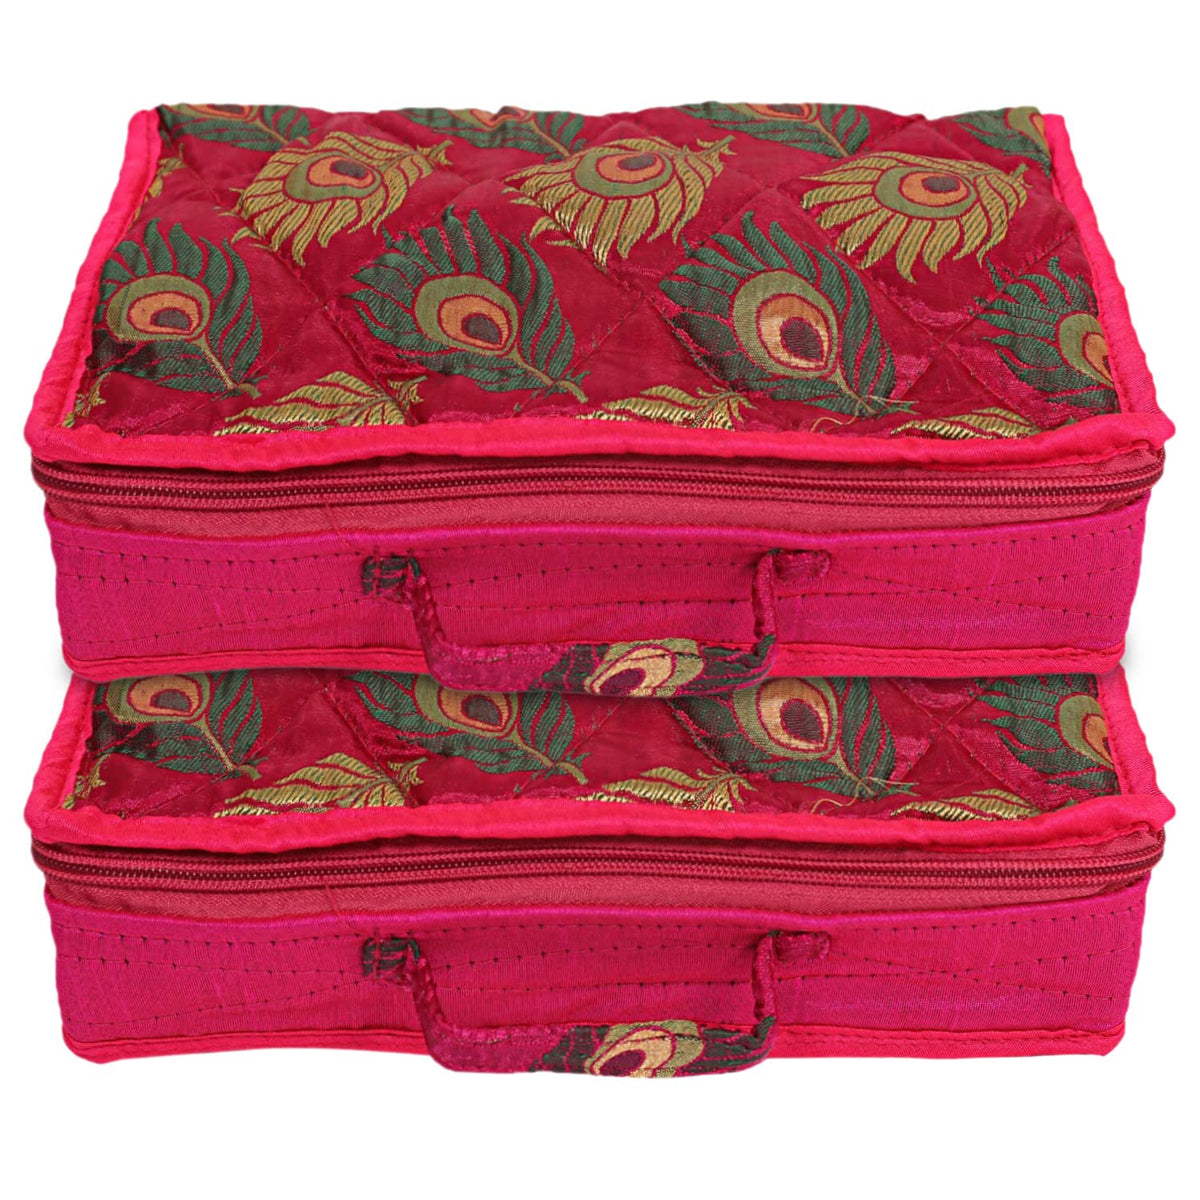 Kuber Industries Feather Print Satin Jewellery Organizer For Small Jewellery With 4 Pouches Pack Of 2 (Pink) 54KM4063